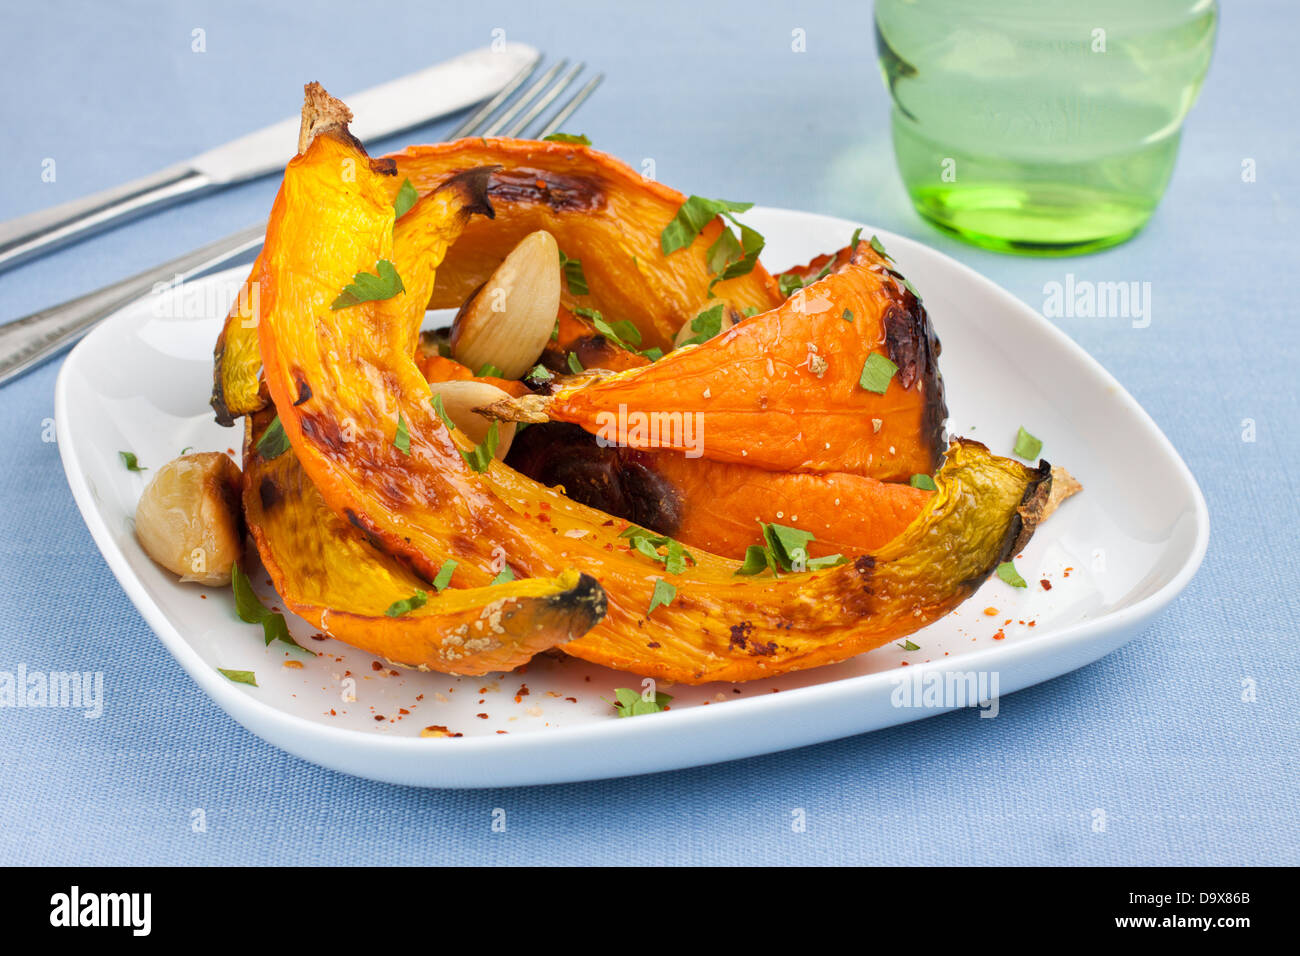 Oven roasted pumpkin slices on plate Stock Photo